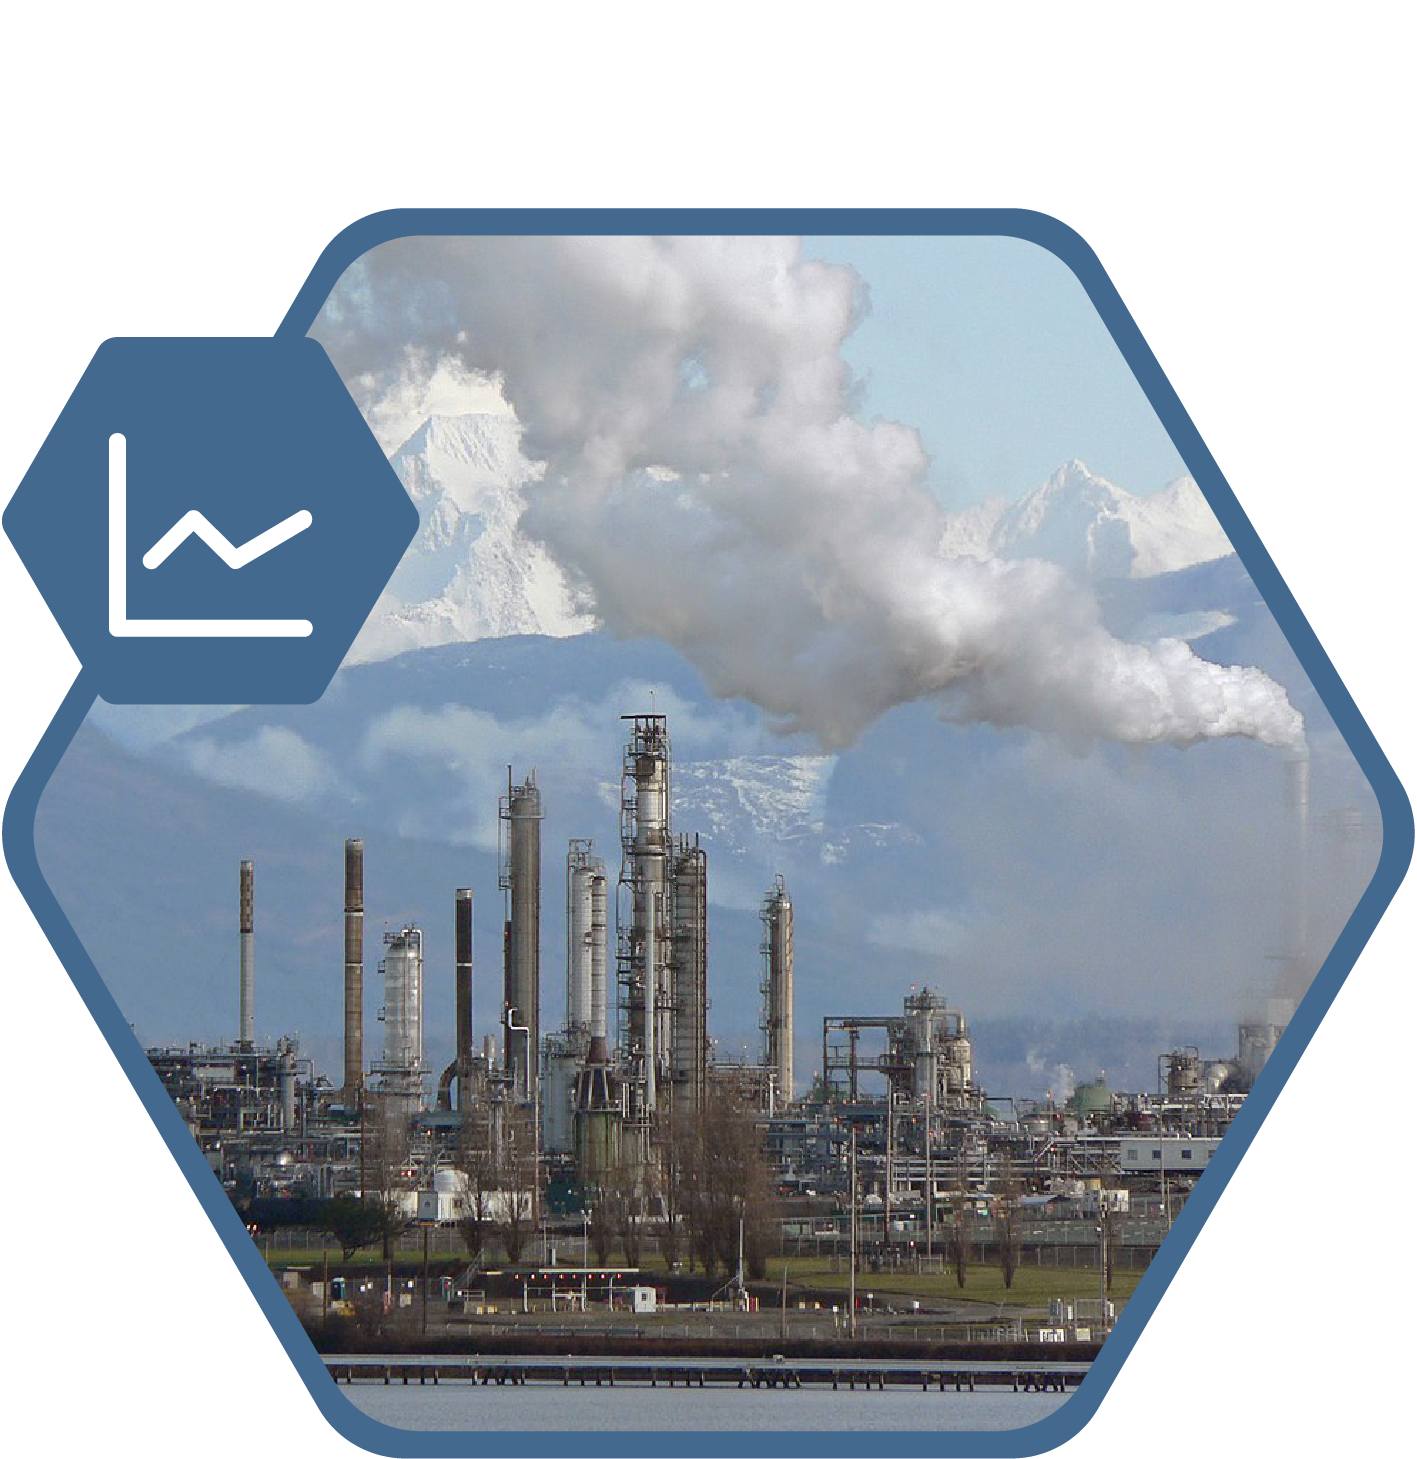 Anacortes refinery in a blue hexagon with rounded corners and a circular icon showing a chart with an upward trajectory